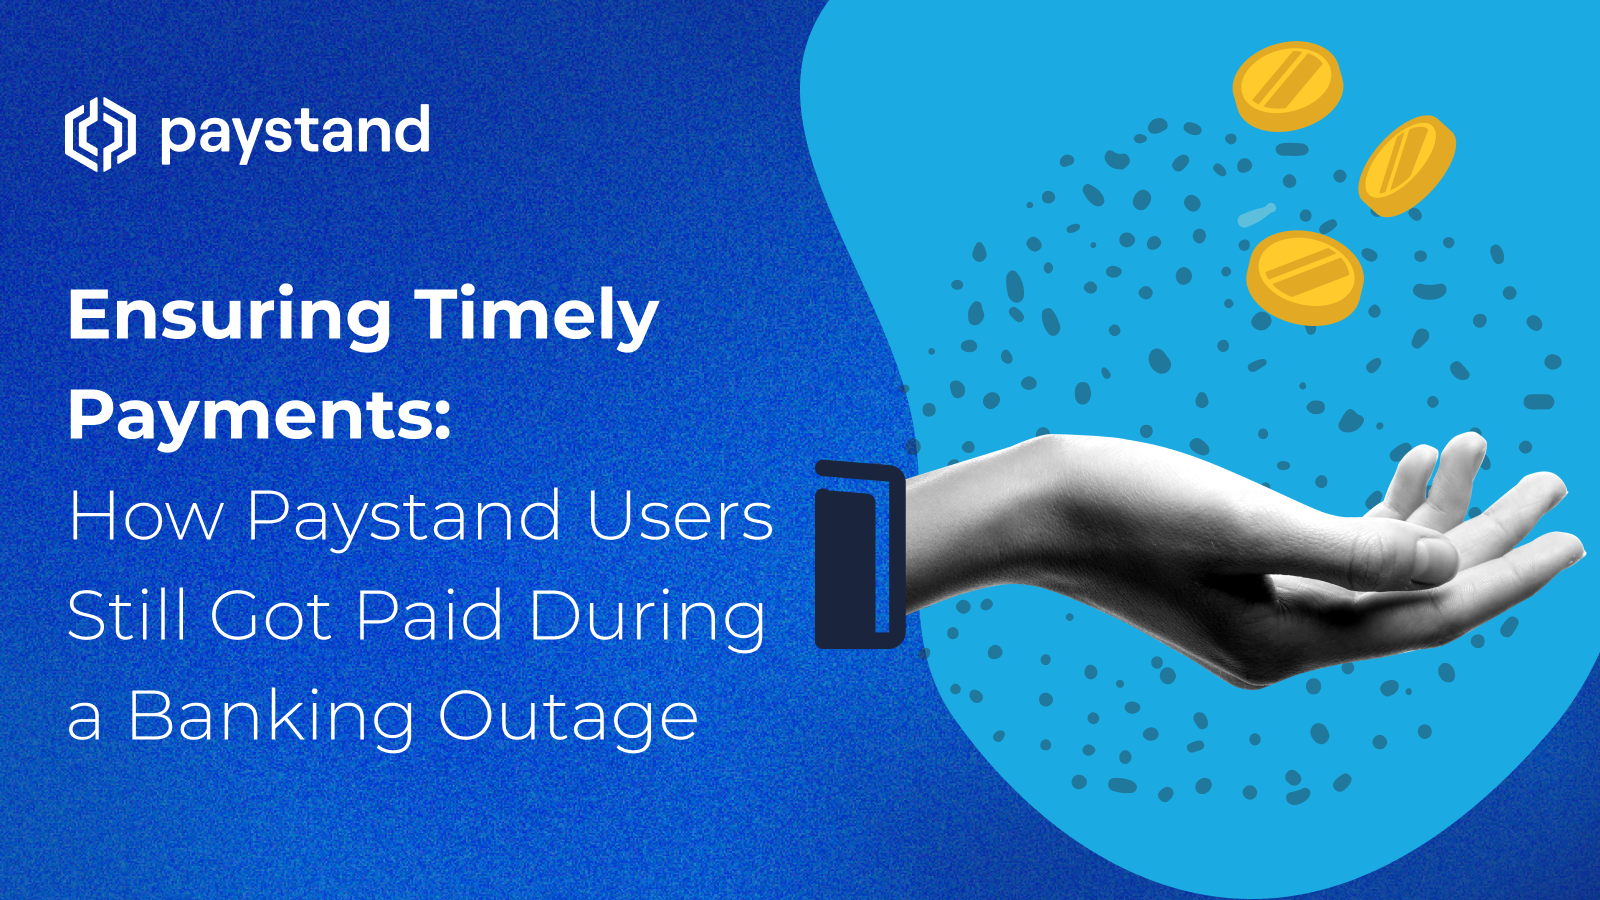 Ensuring Timely Payments: How Paystand Users Still Got Paid During a Banking Outage